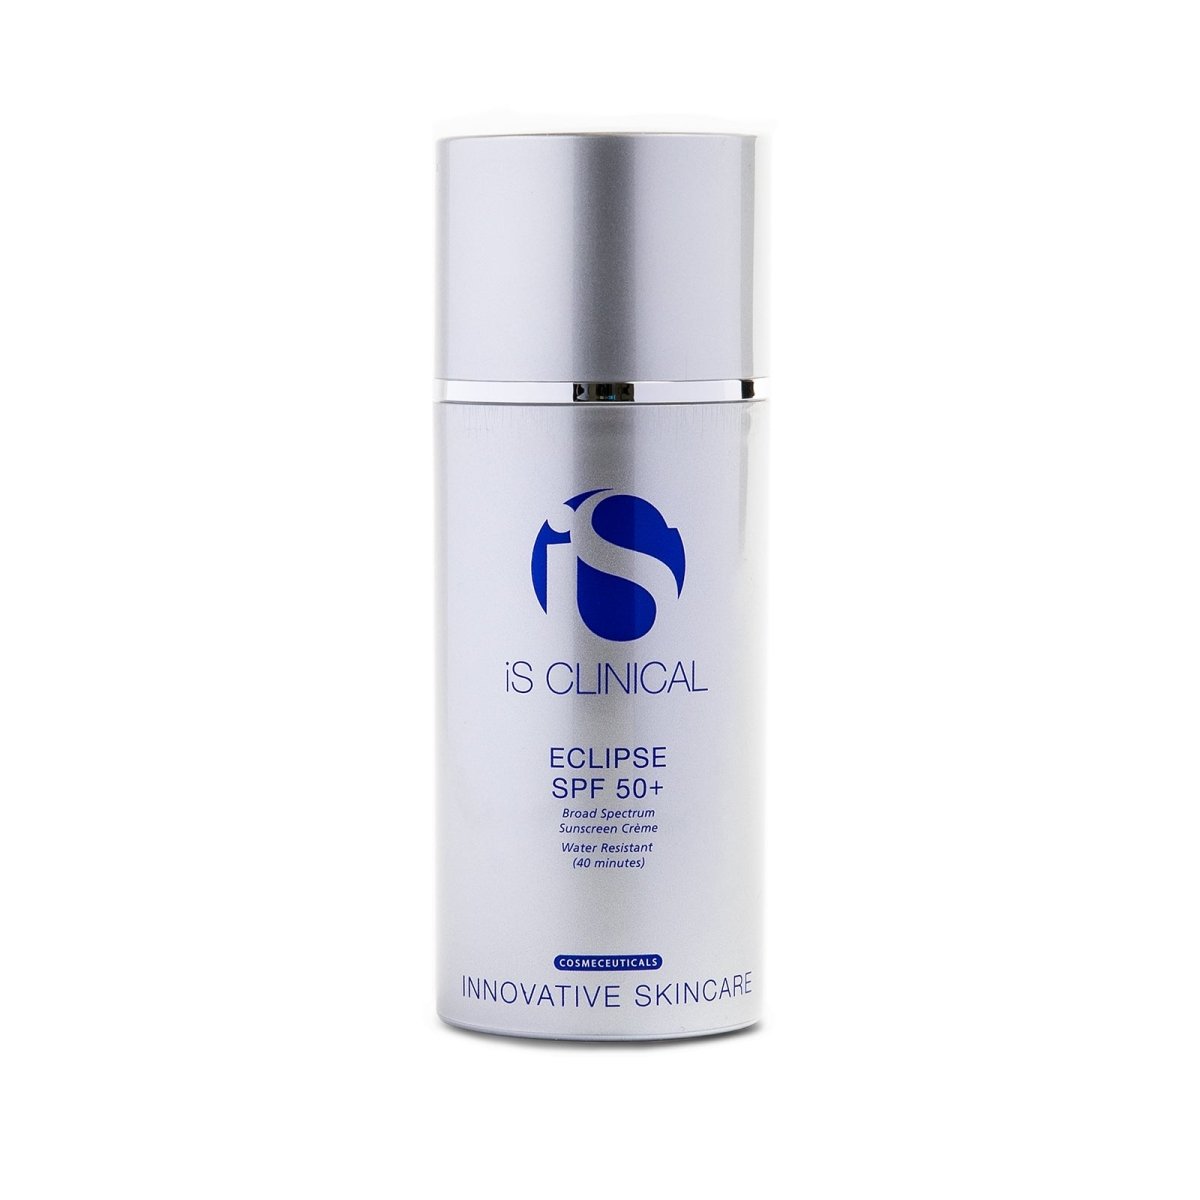 iS Clinical Eclipse SPF 50+ - SkincareEssentials